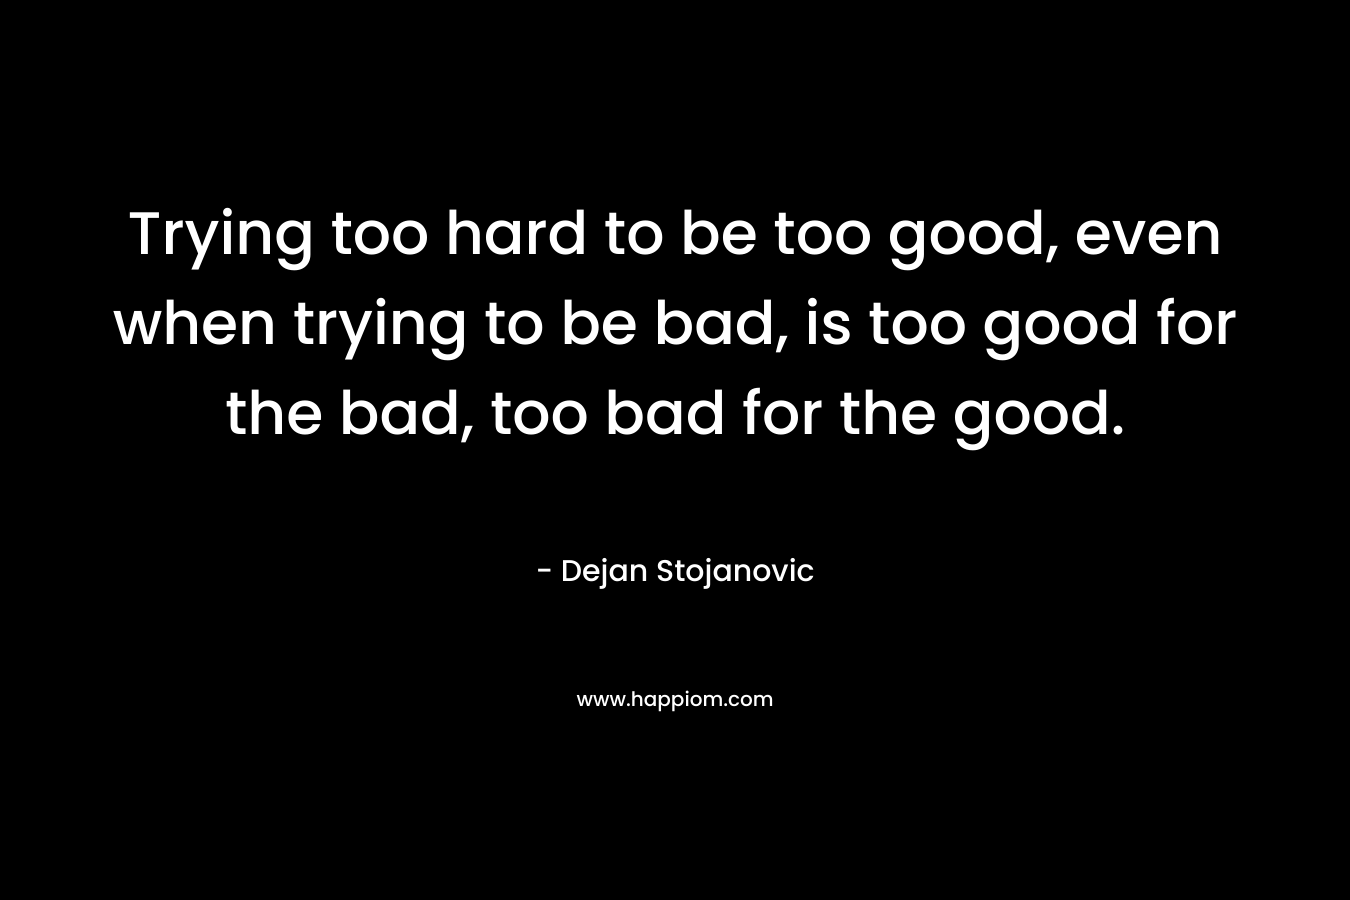 Trying too hard to be too good, even when trying to be bad, is too good for the bad, too bad for the good.